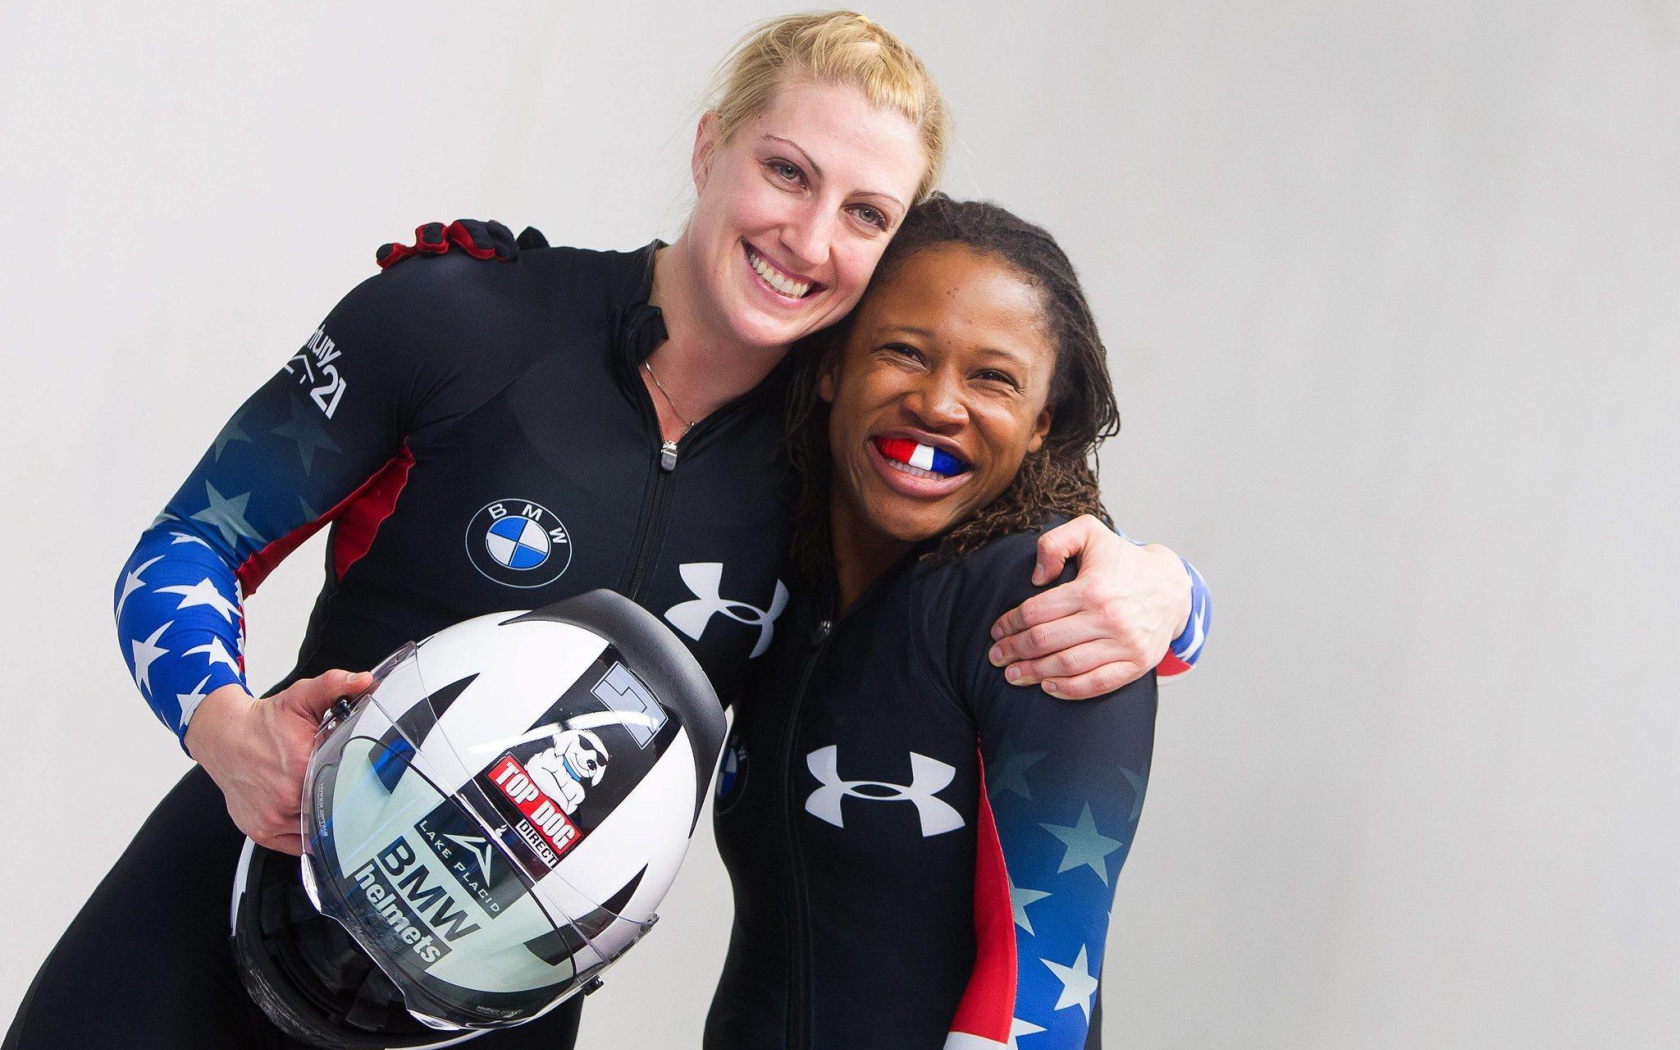 American bobsledder Lauryn Williams and Ilana Myers holders silver medals in Sochi